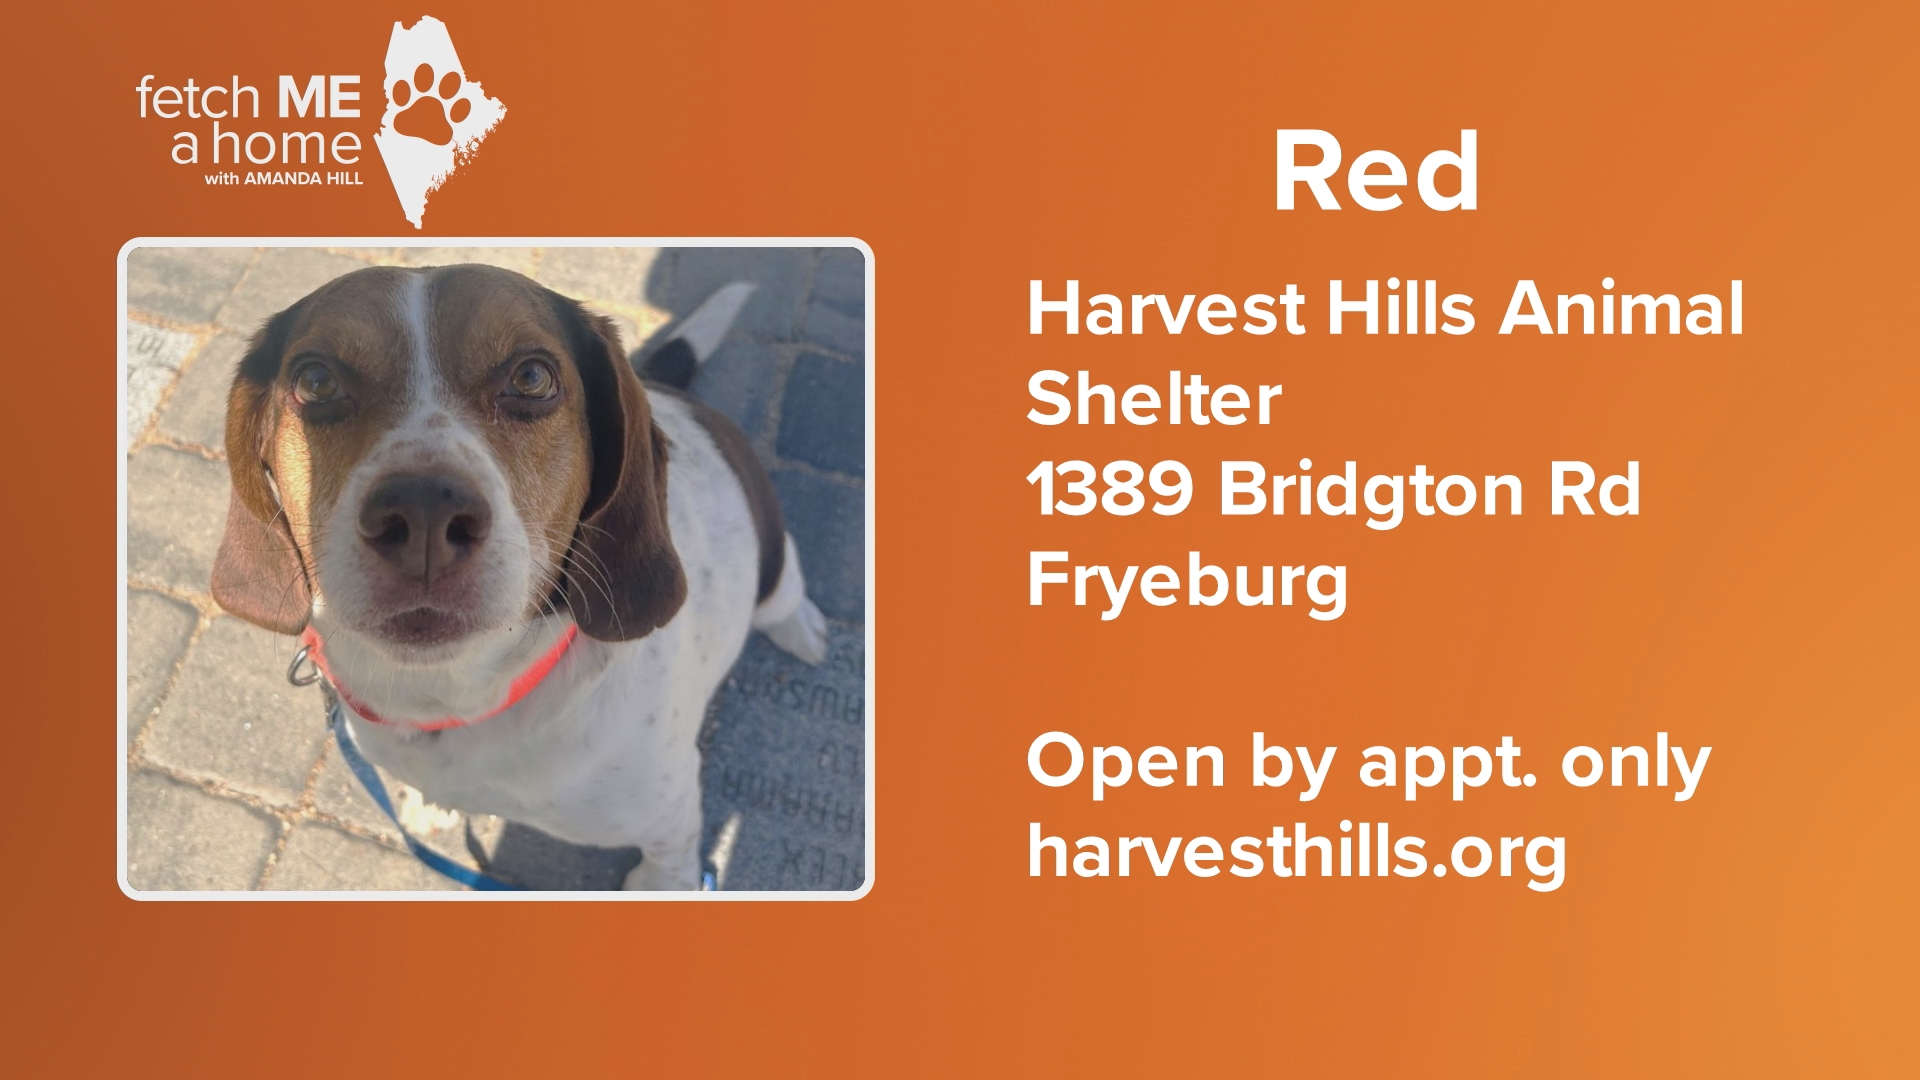 Red is a 7-year-old beagle available for adoption through Harvest Hills Animal Shelter in Fryeburg.